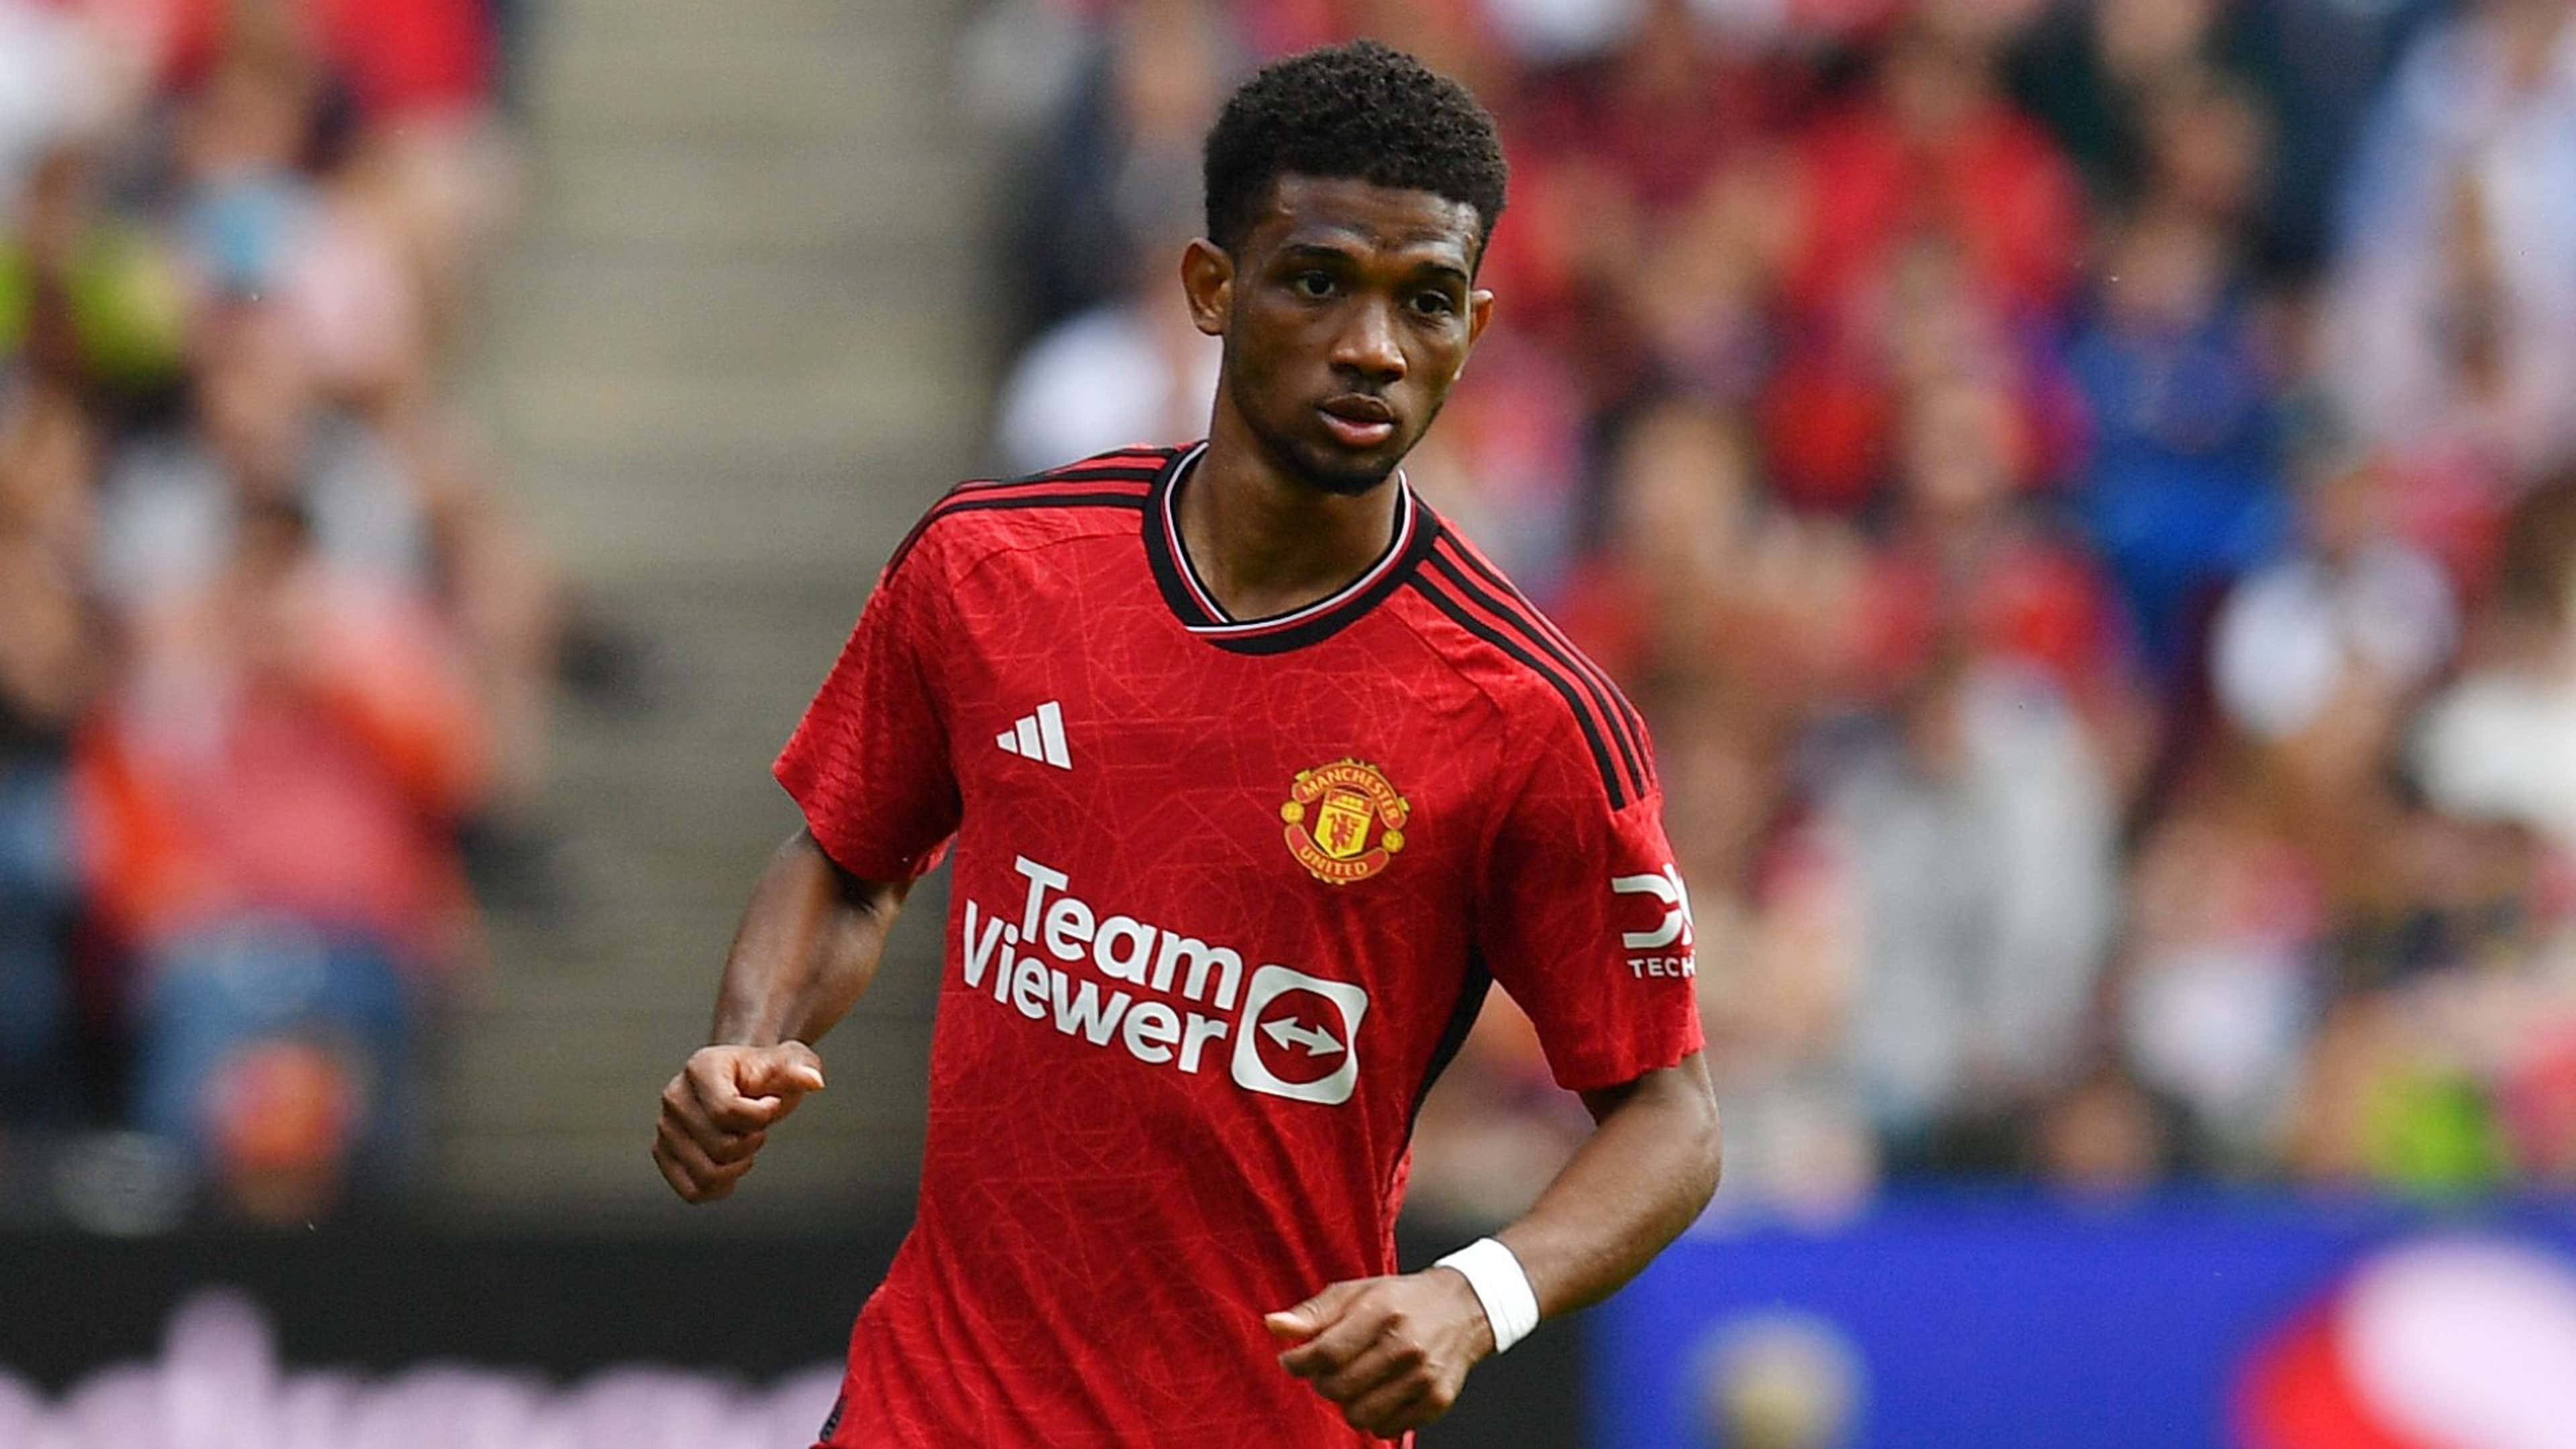 Devastating for Amad Diallo! Man Utd confirm winger will miss part of Premier League season and will not make summer transfer due to knee injury | Goal.com US